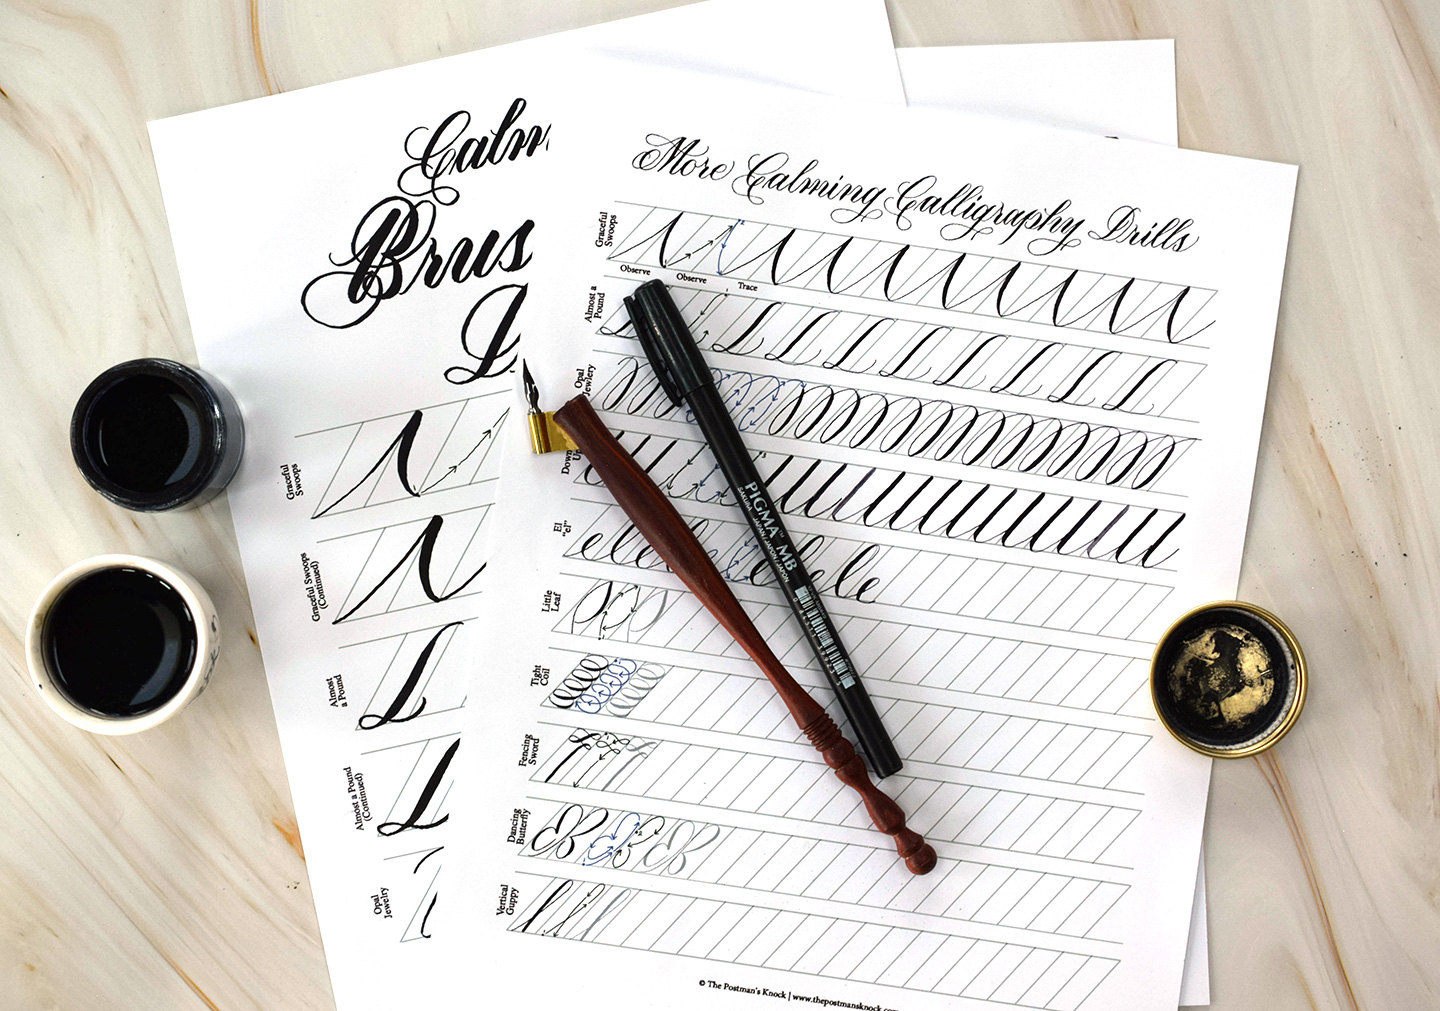 *FREE* – More Calming Calligraphy Drills (Pointed Pen + Brush Pen)